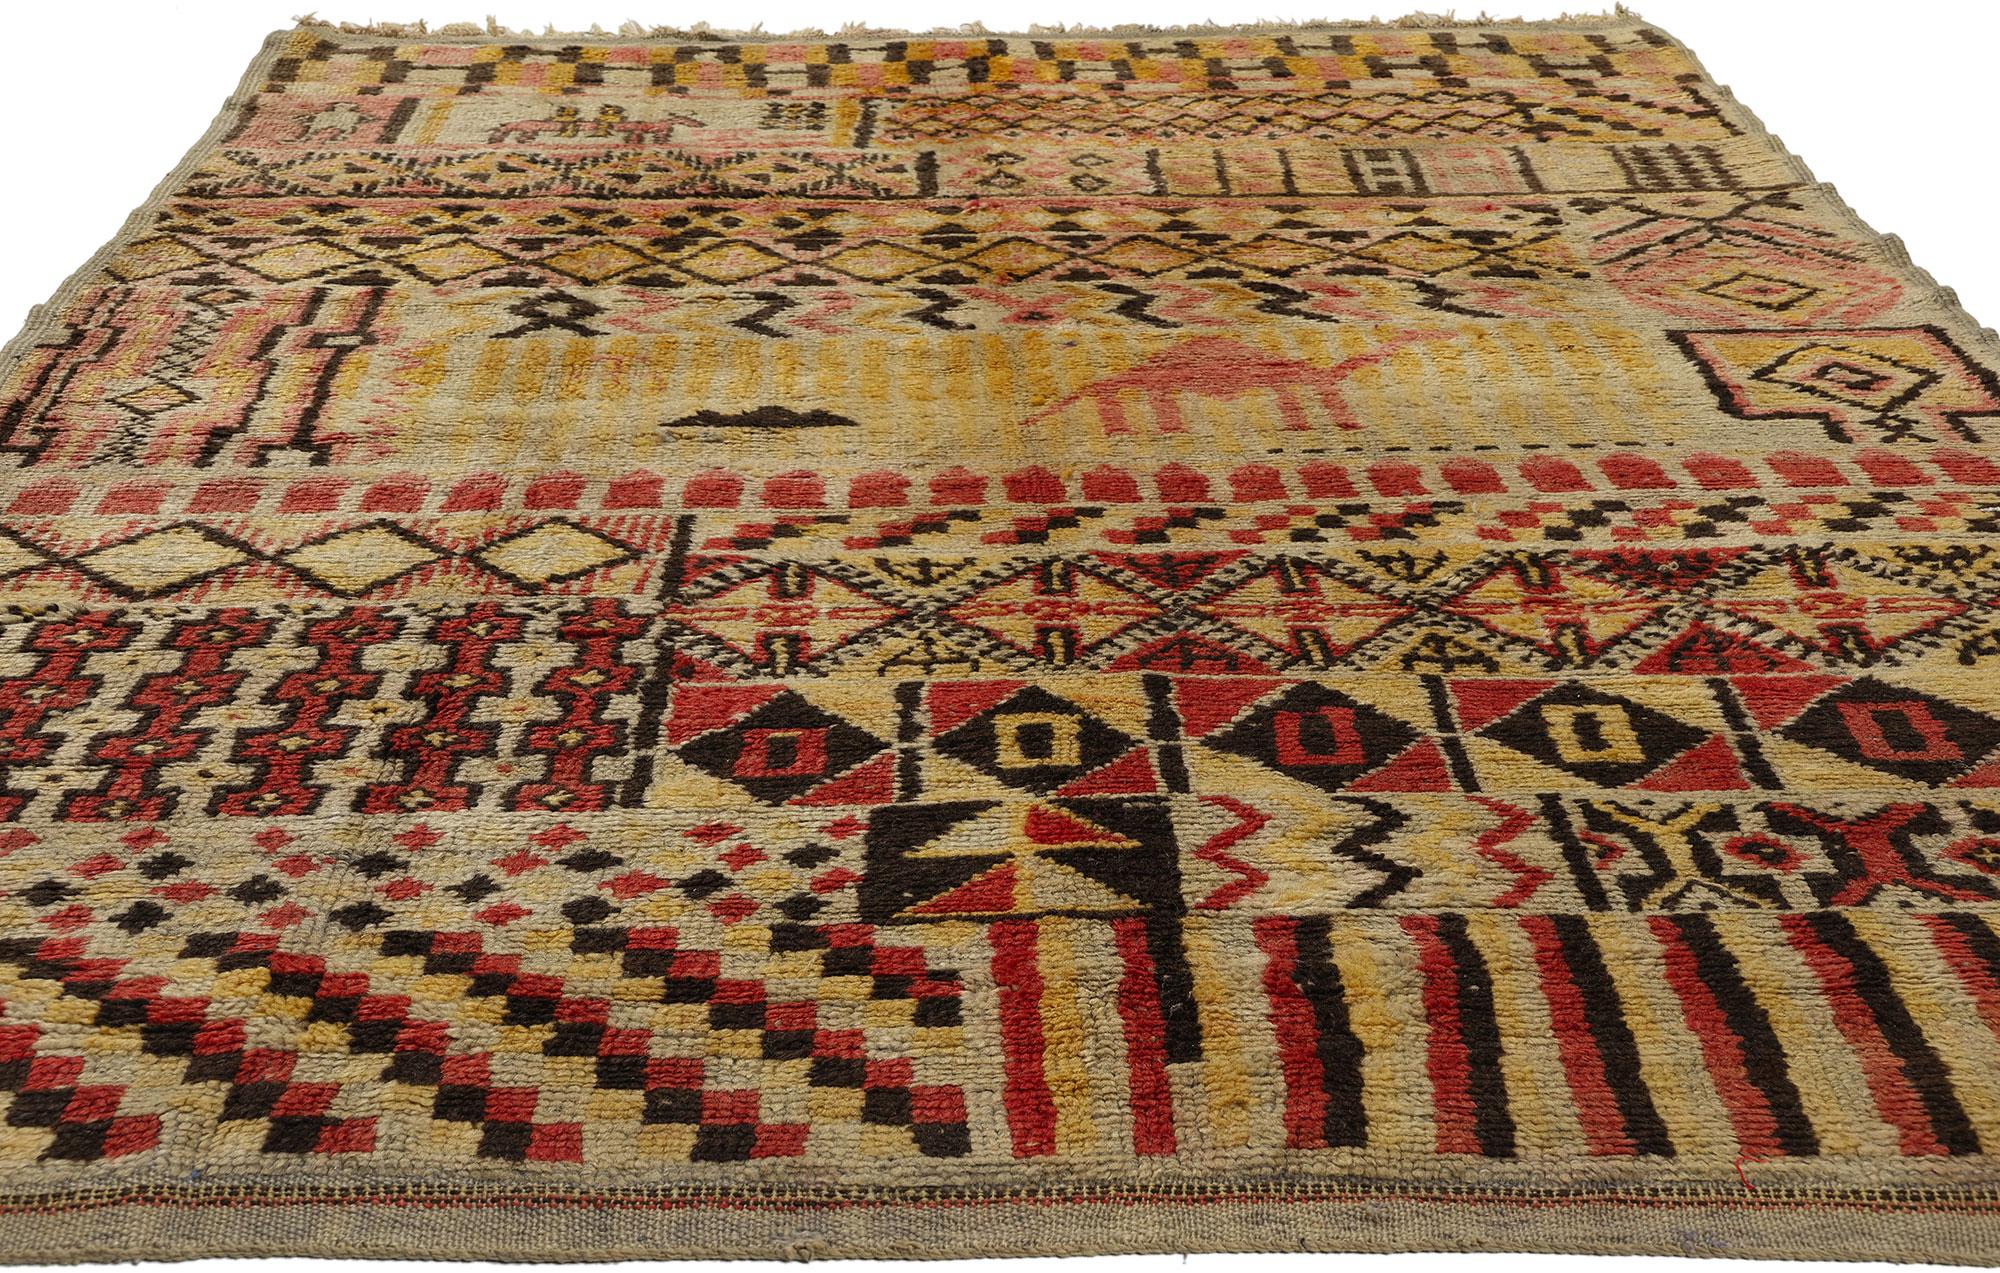 Tribal Vintage Boujad Moroccan Pictorial Rug with Rustic Earth-Tone Colors For Sale